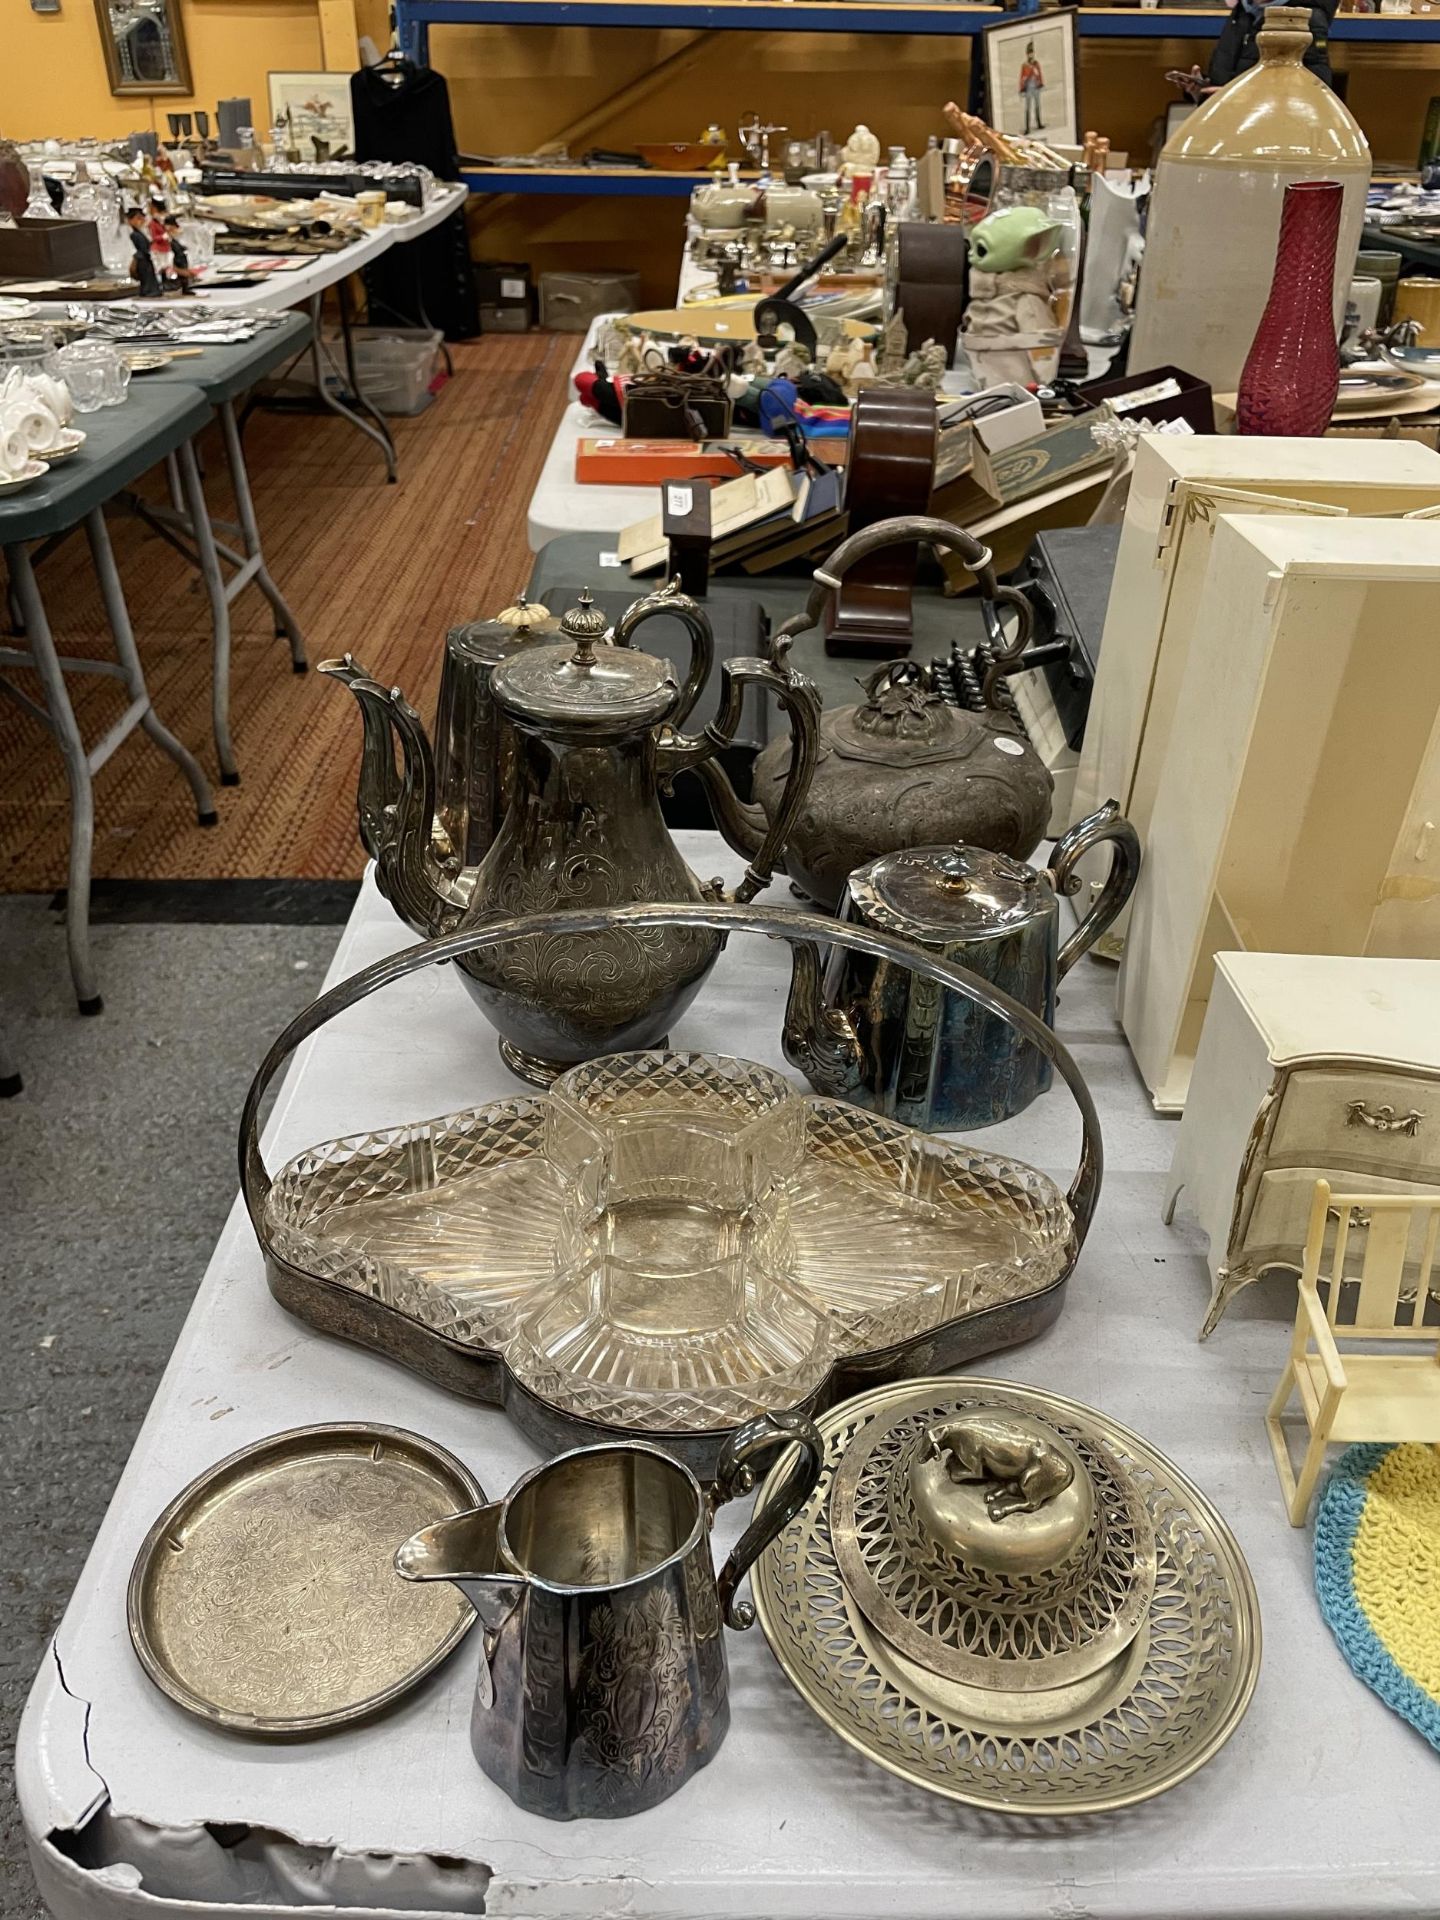 VARIOUS SILVER PLATED ITEMS TO INCLUDE COFFEE POTS, TEA POTS, HORS D'OEUVRES DISH, JIUG ETC